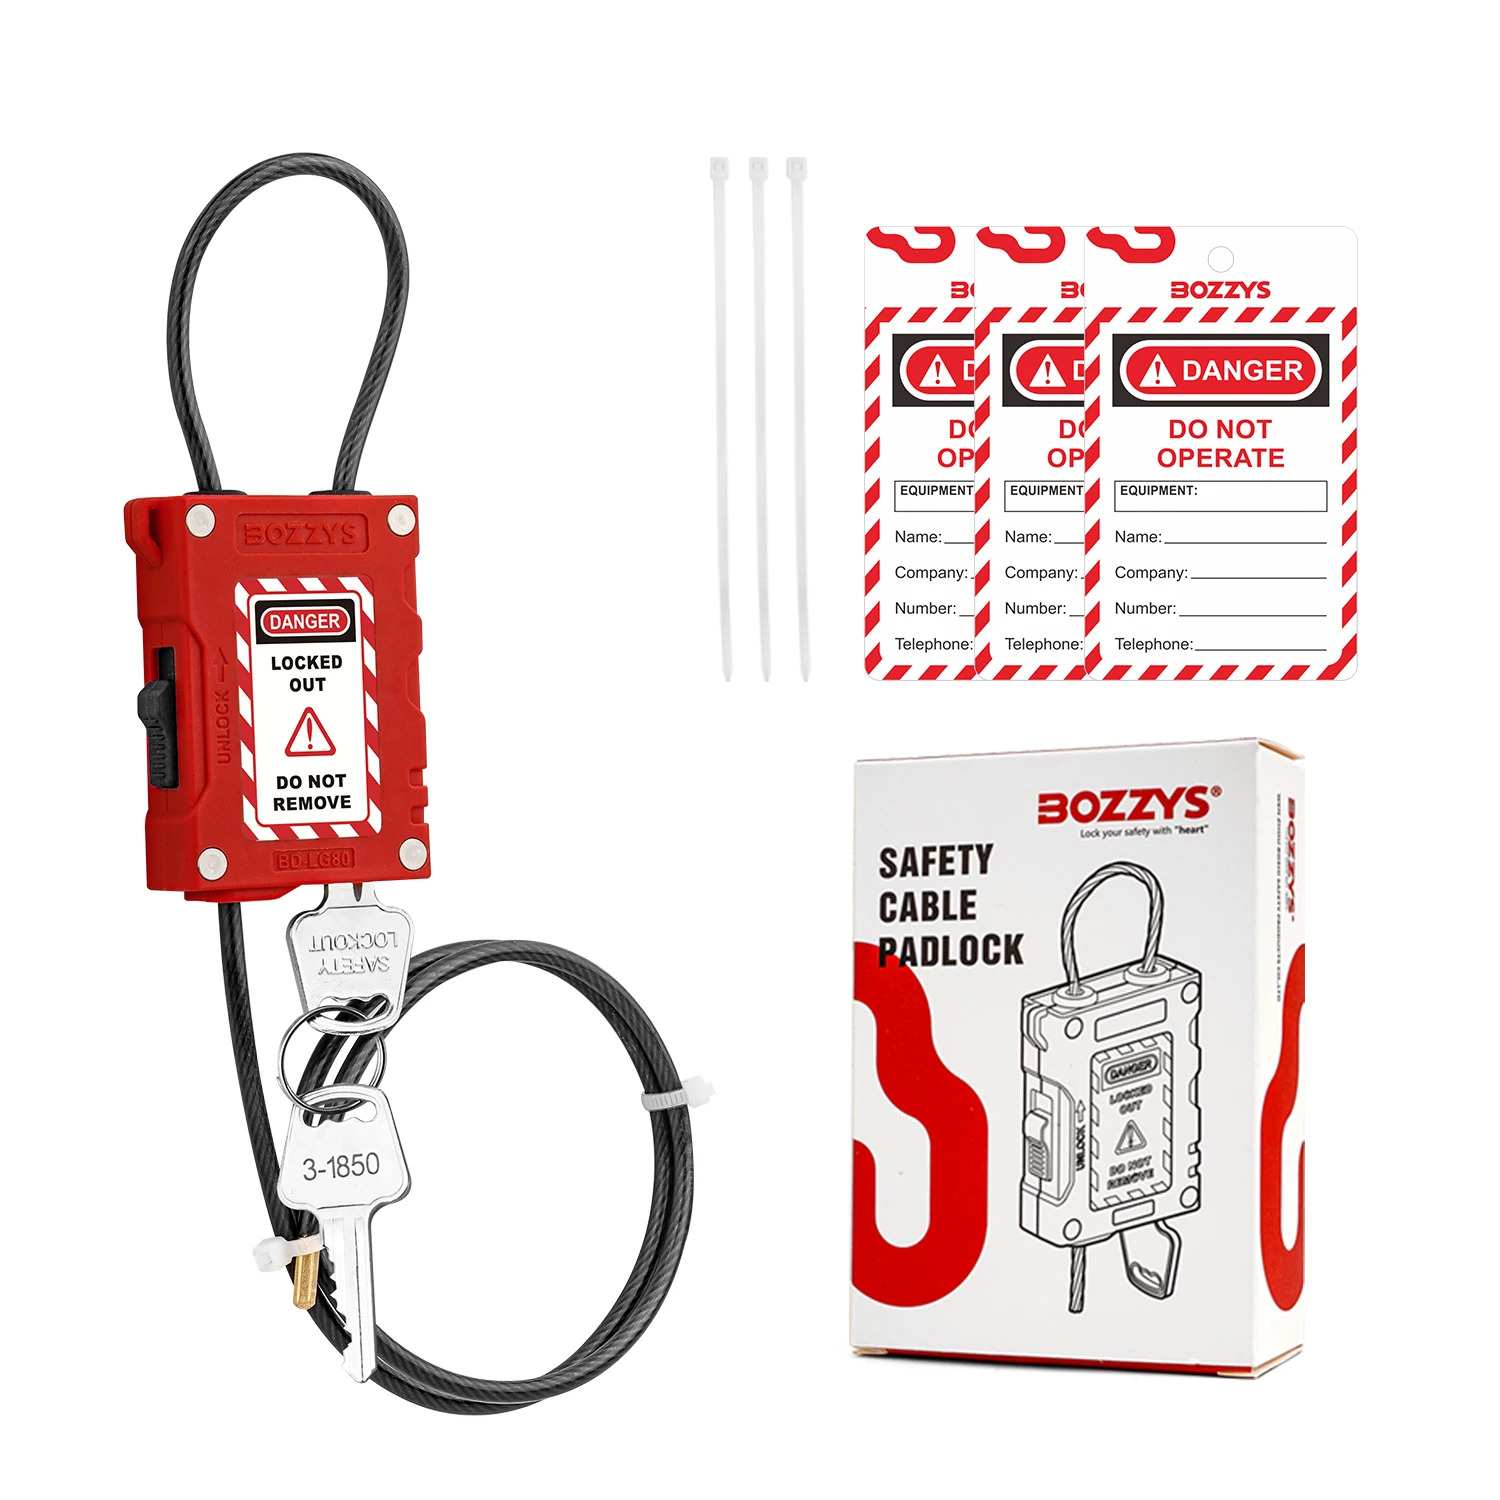 

Adjustable cable padlock with PVC UV-protection coating stainless steel cable for Industry energy isolation lockout/tagout